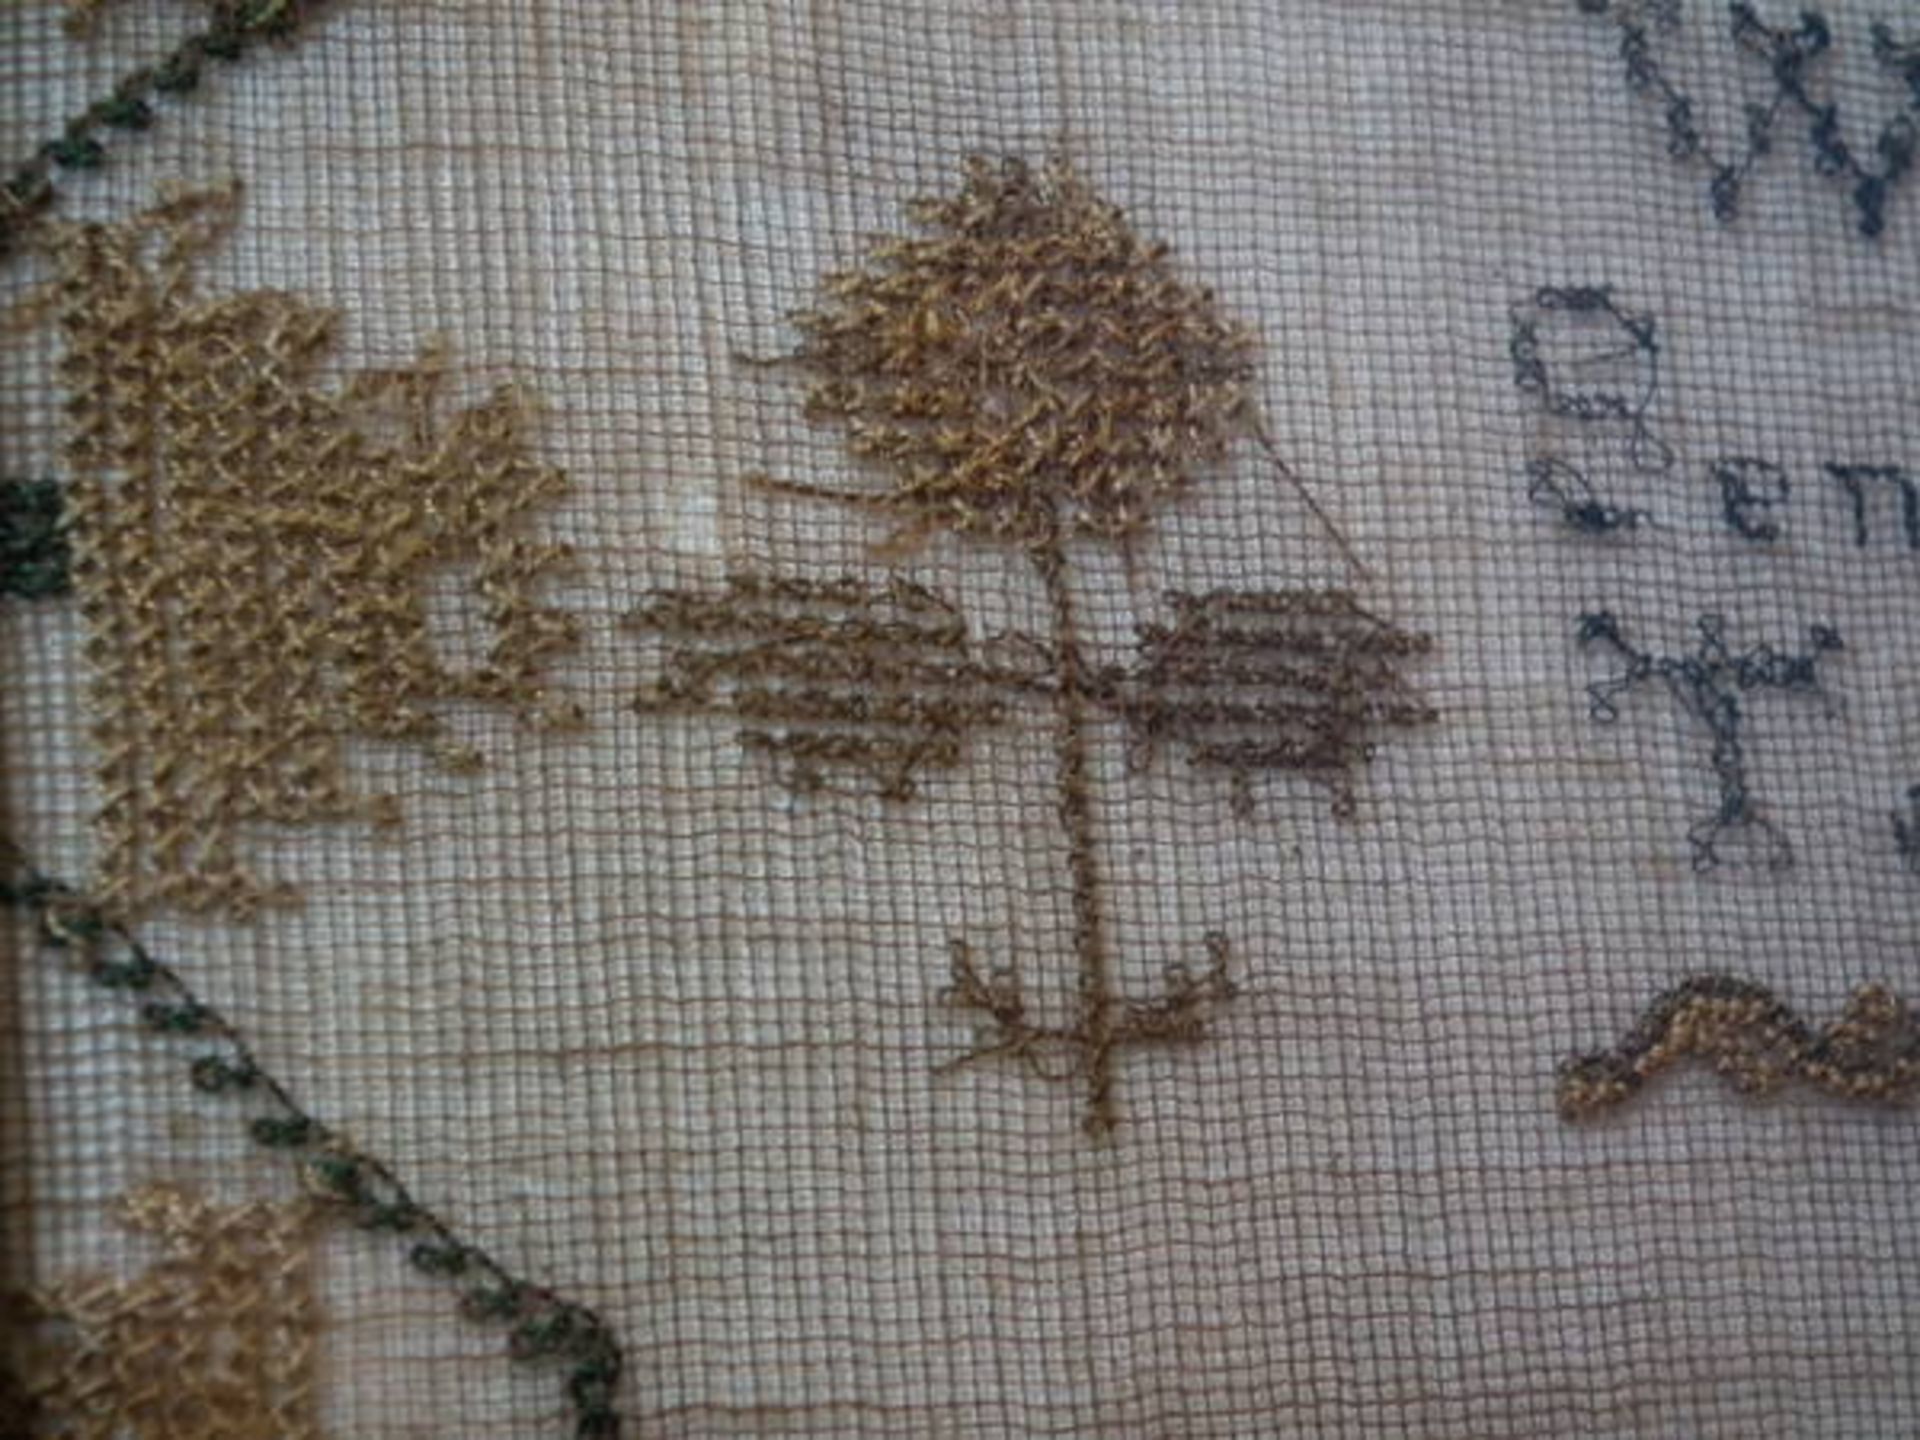 Needlework School Sampler dated 1843 by Sarah Bryan FREE UK DELIVERY - Image 28 of 38